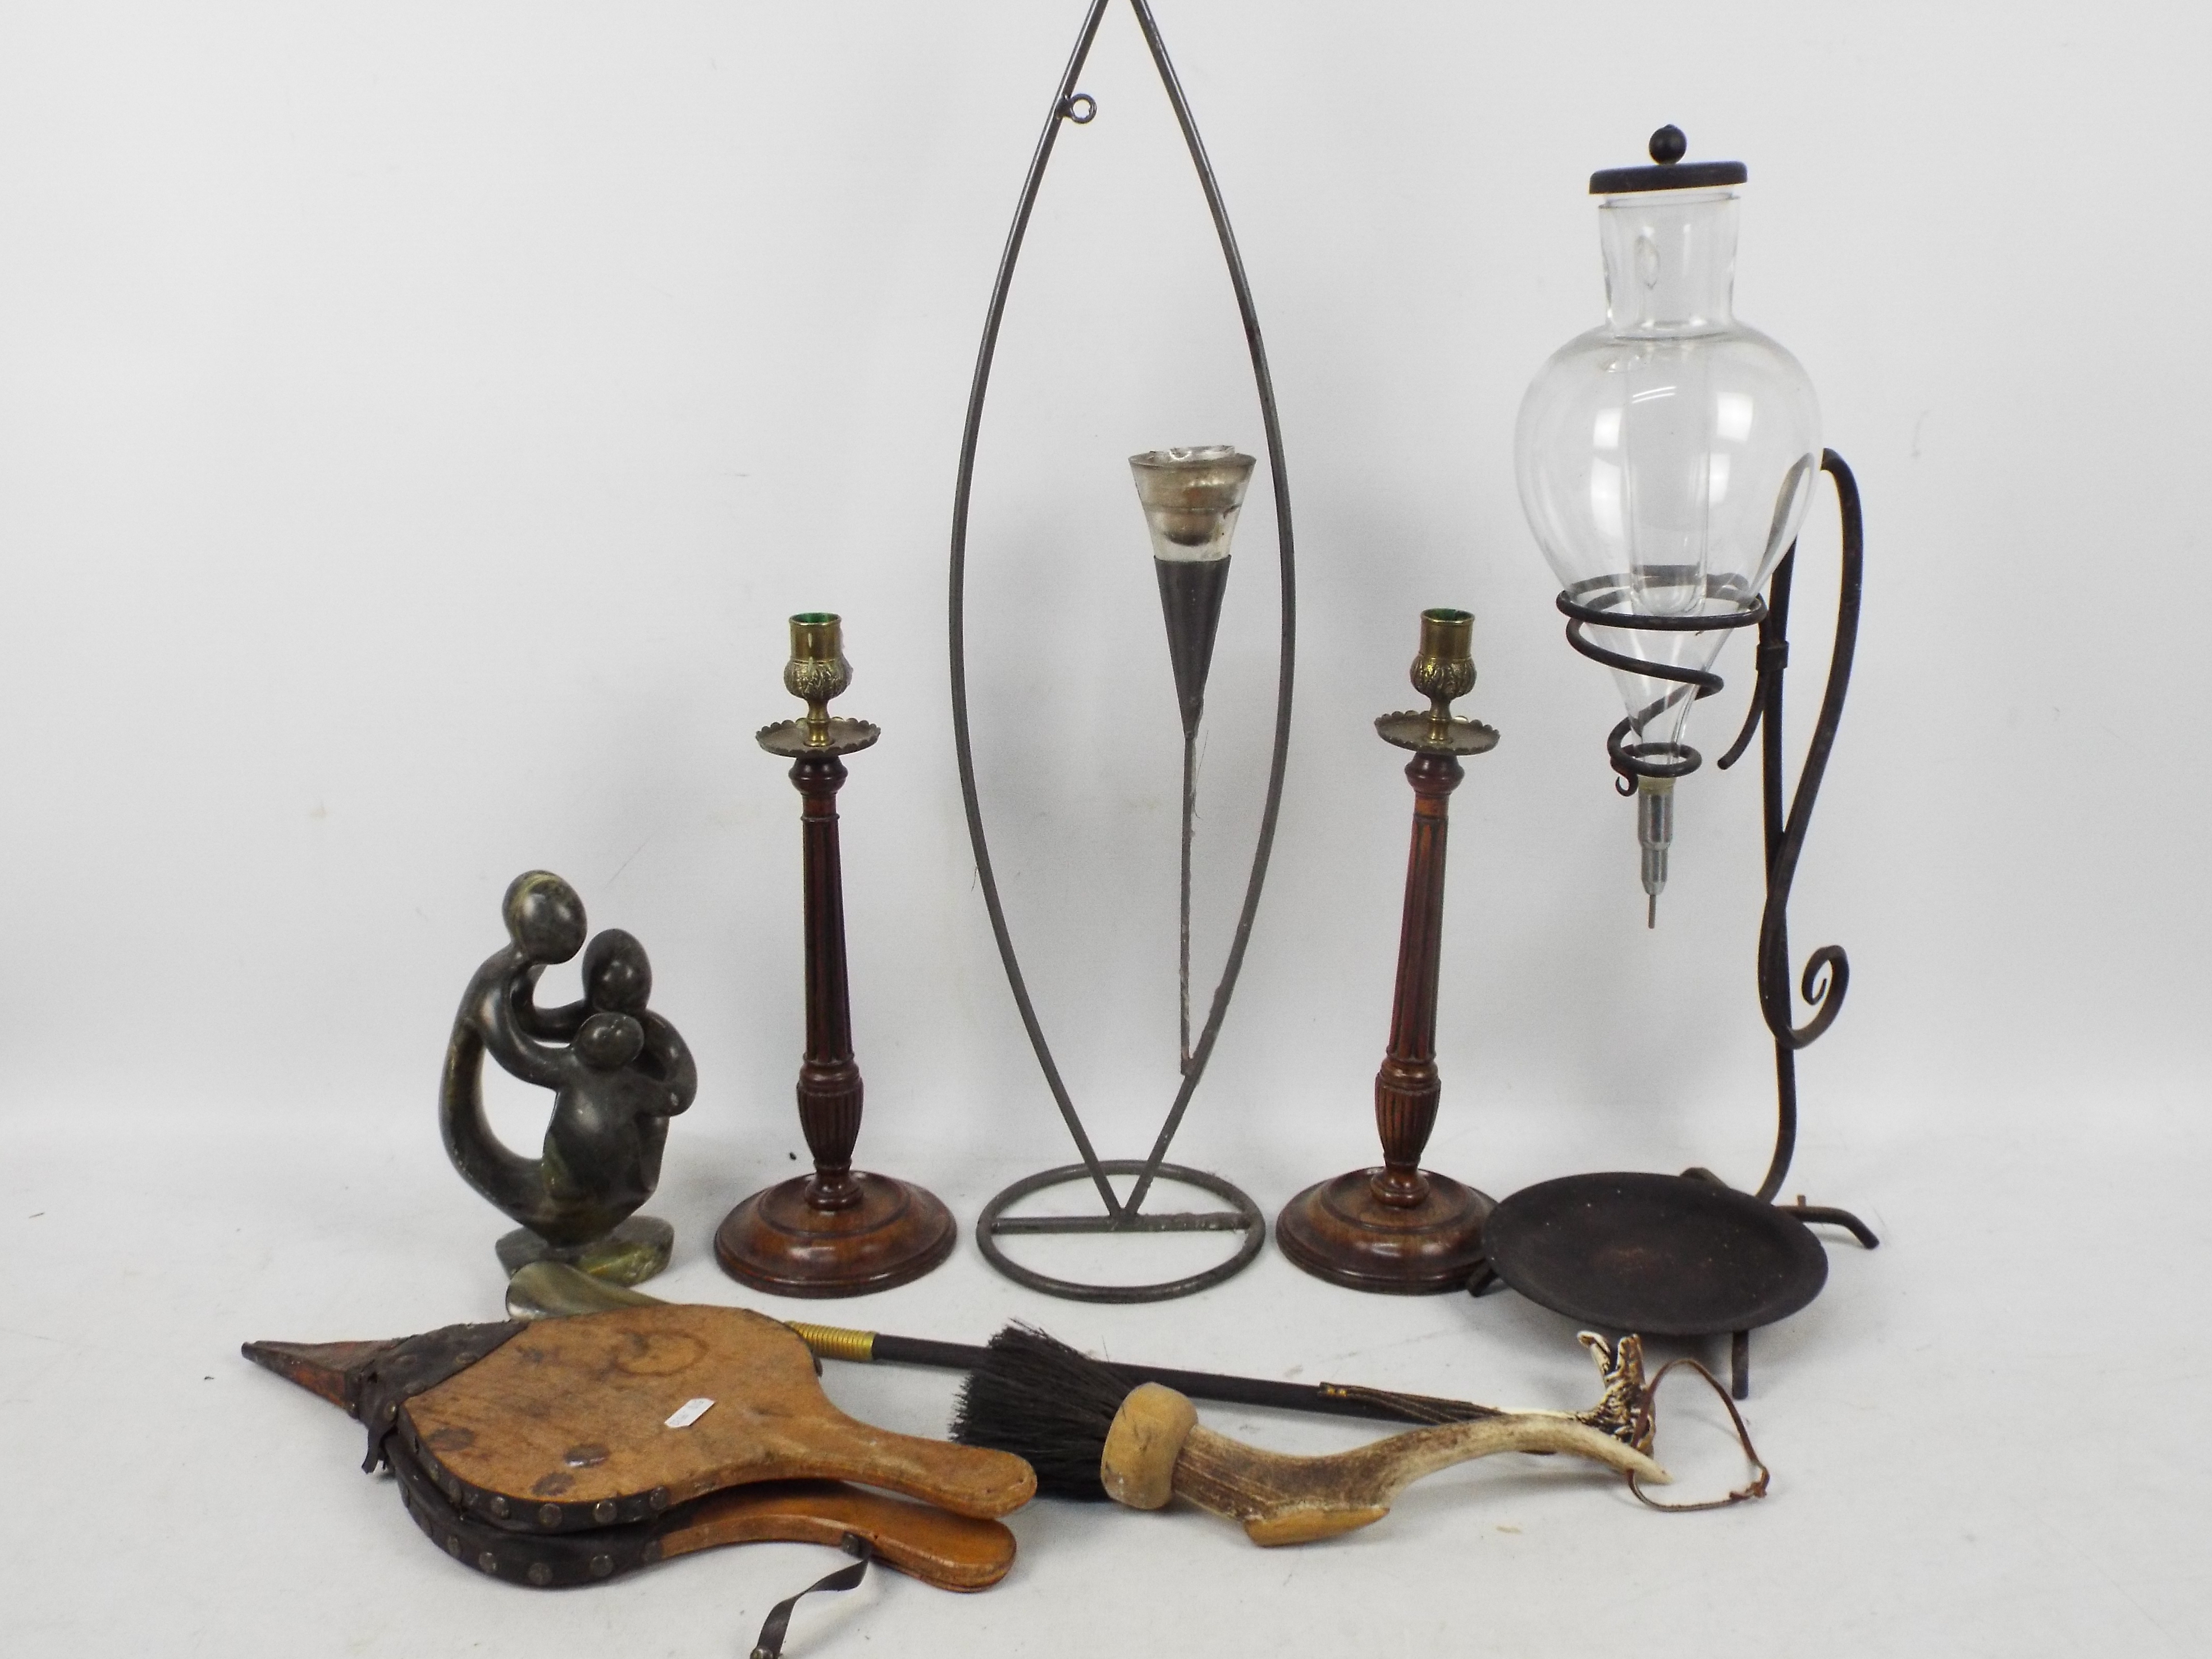 Lot to include vintage bellows, candlest